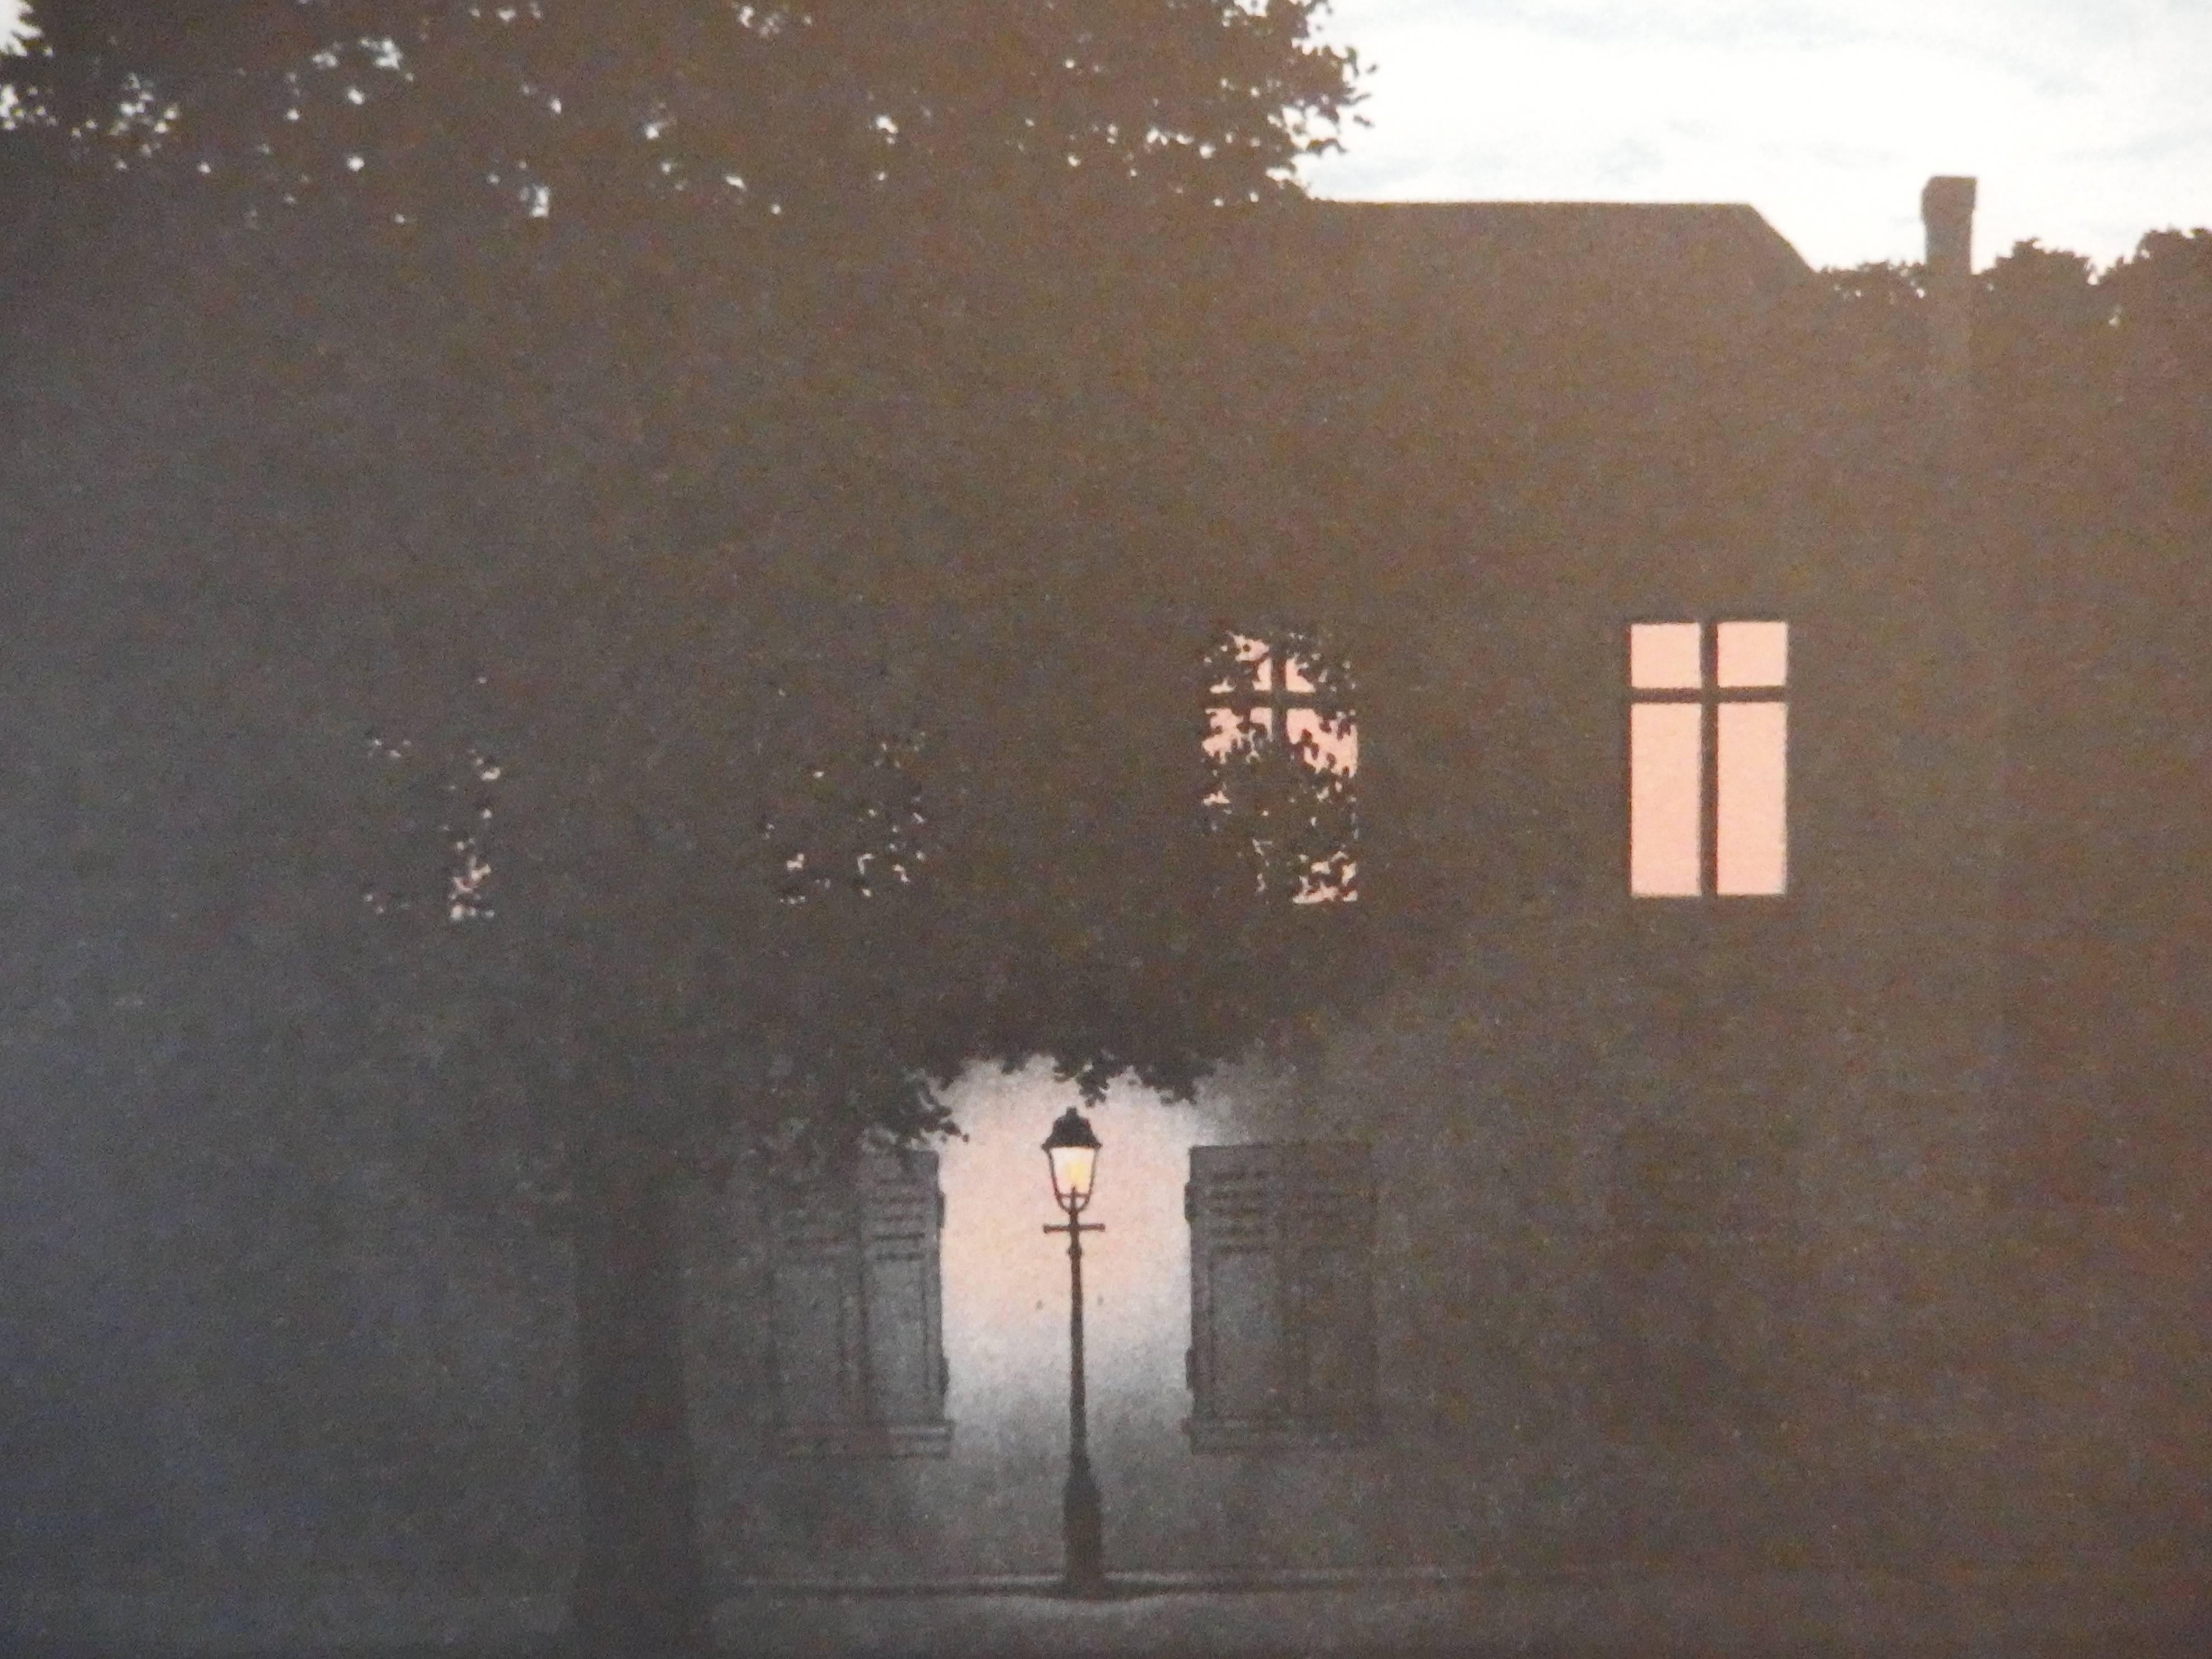 after René Magritte
L’Empire des Lumieres

Lithograph
Printed signature in the plate
300 copies and a few artist proofs
On Vellum BFK Rives
12 x 18